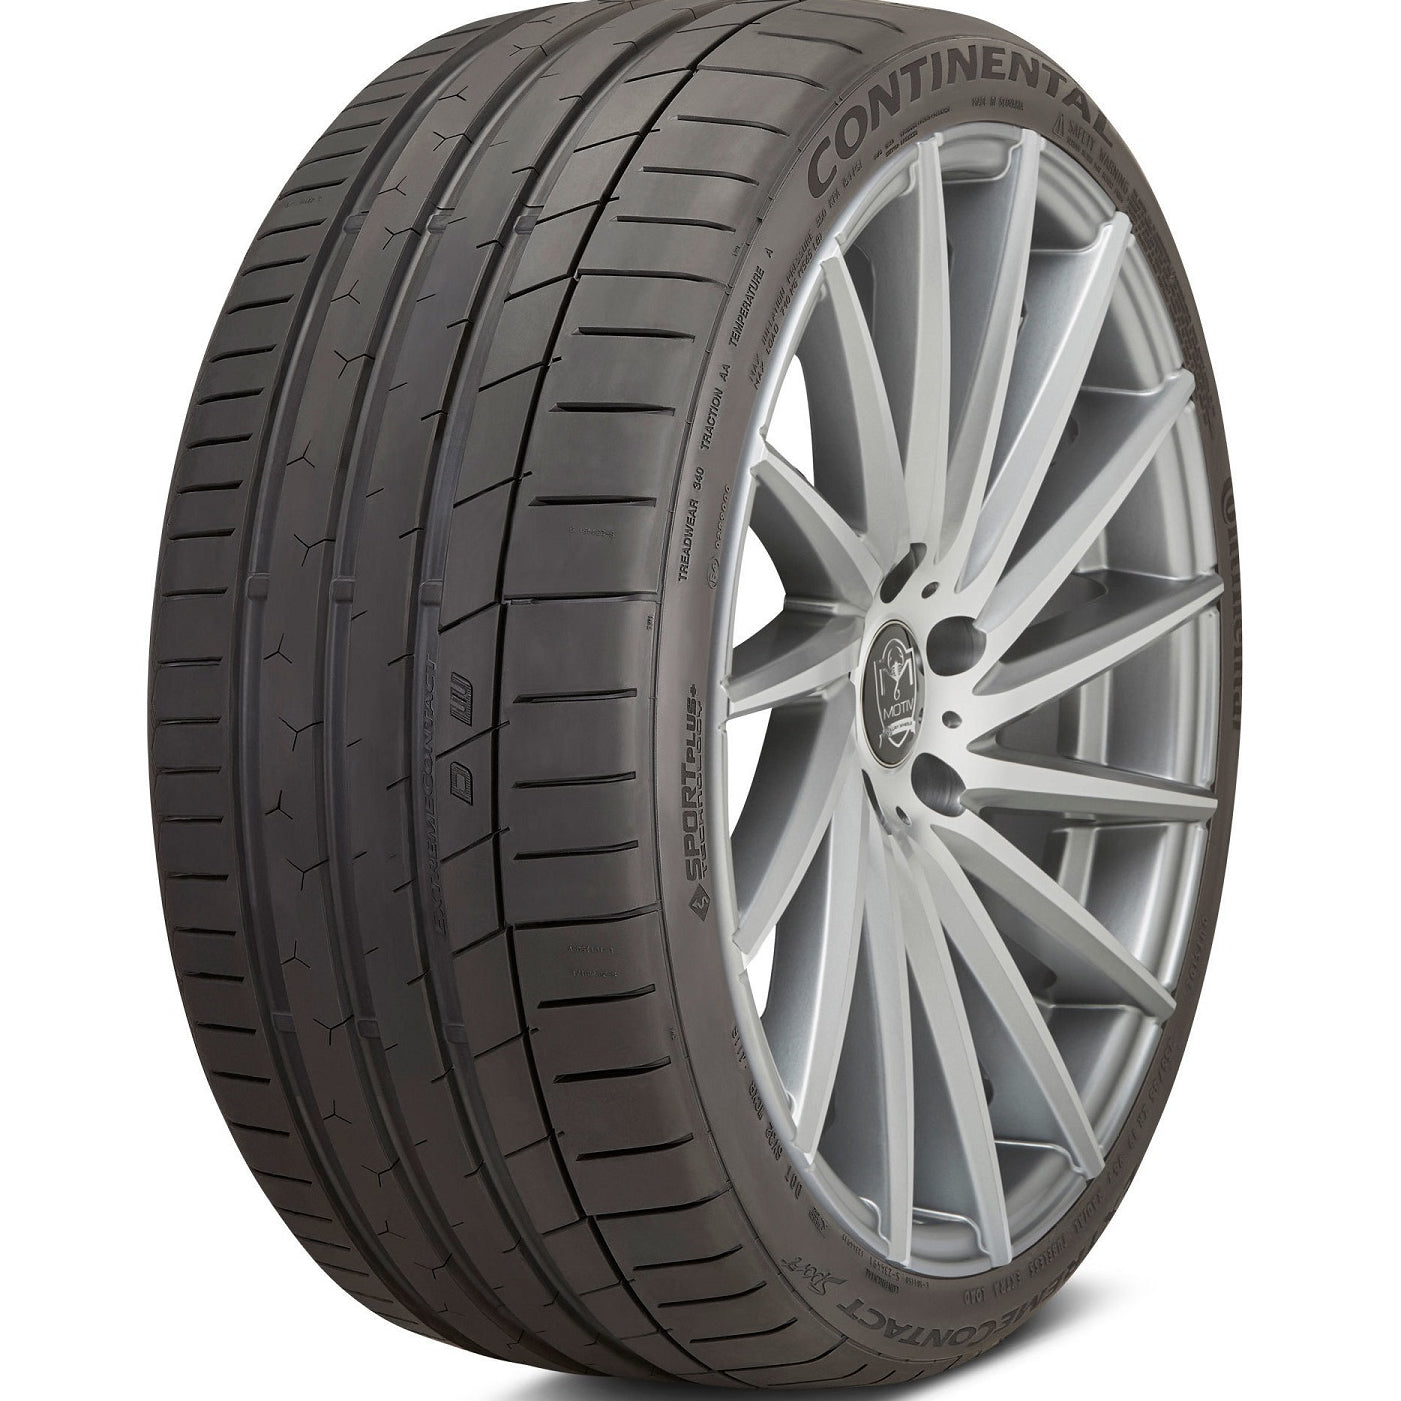 CONTINENTAL EXTREMECONTACT SPORT 205/50ZR17 (25.1X8.1R 17) Tires